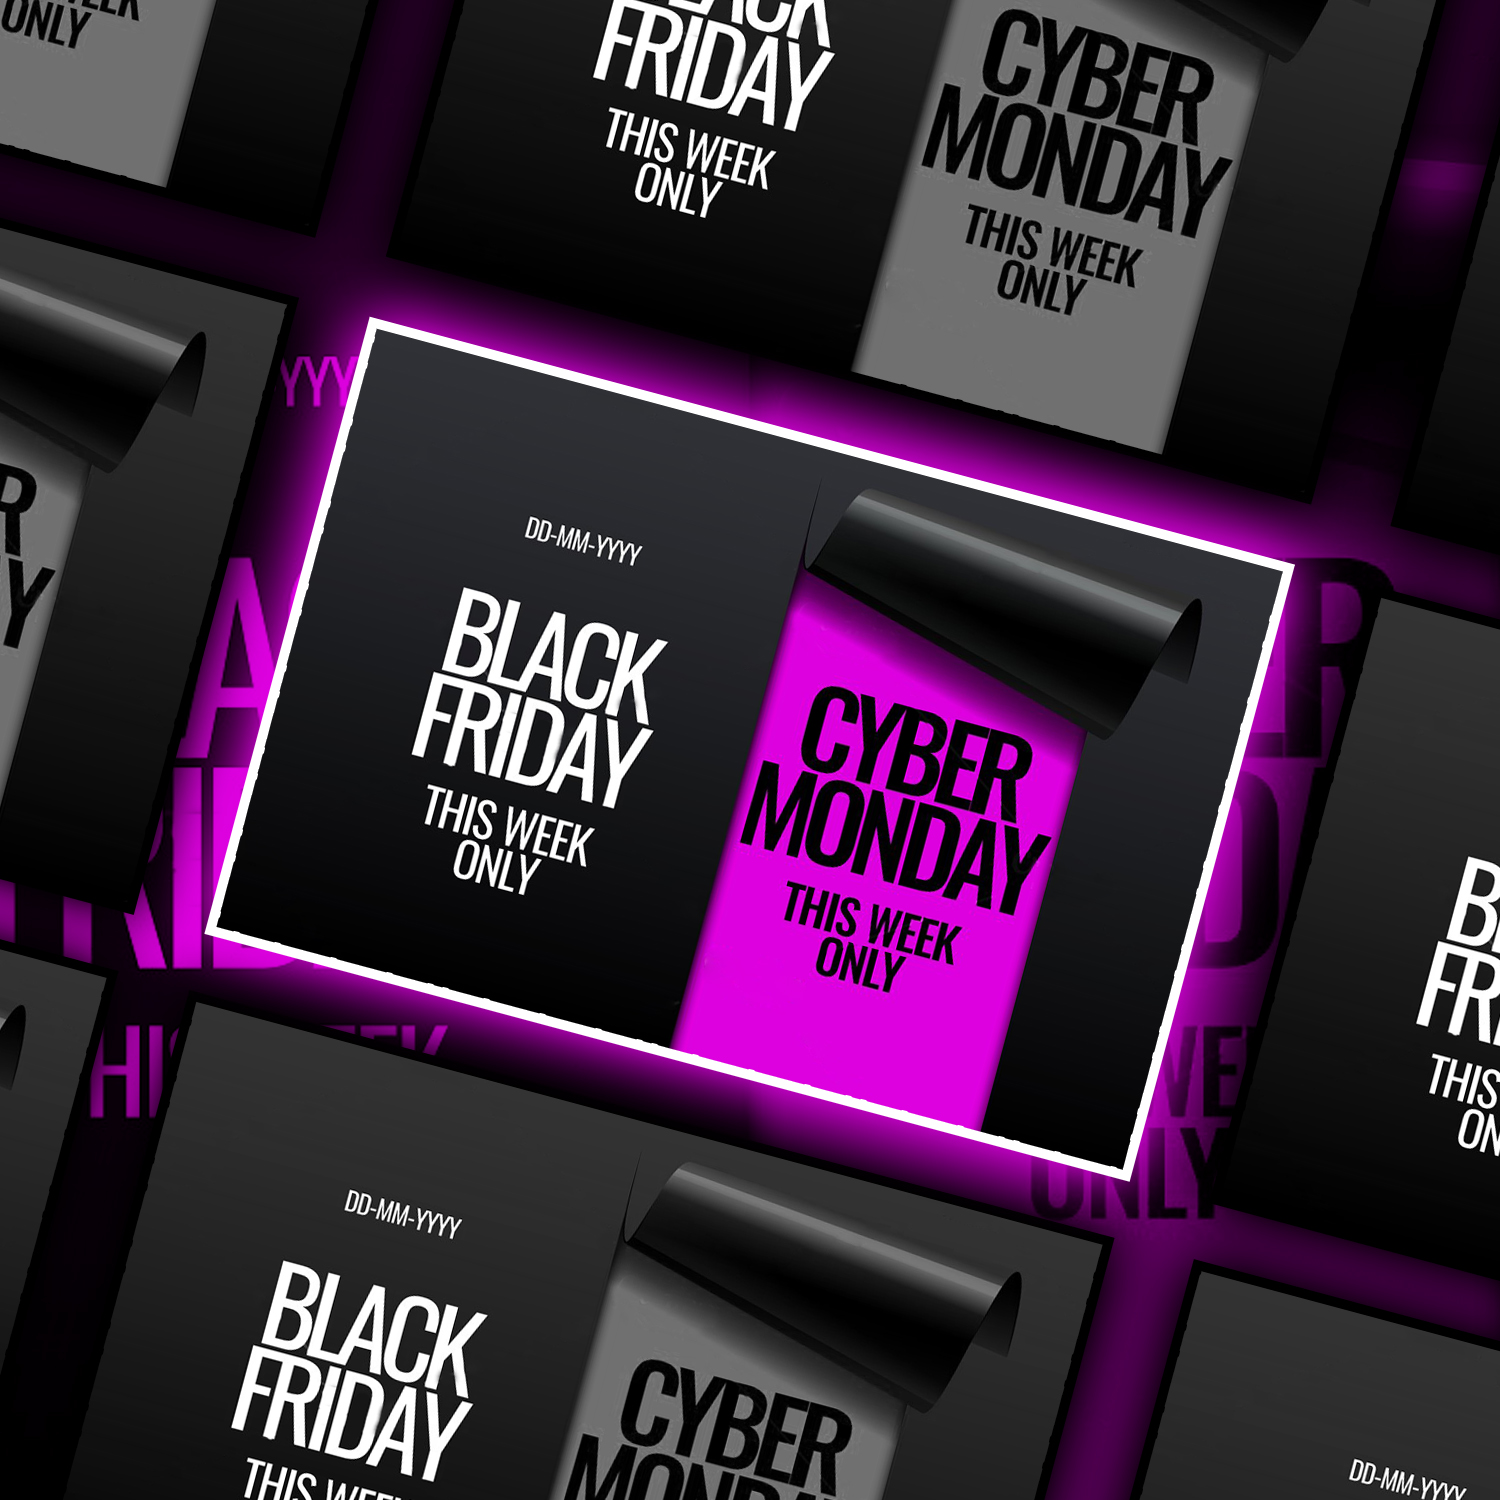 Preview black friday and cyber monday banner.